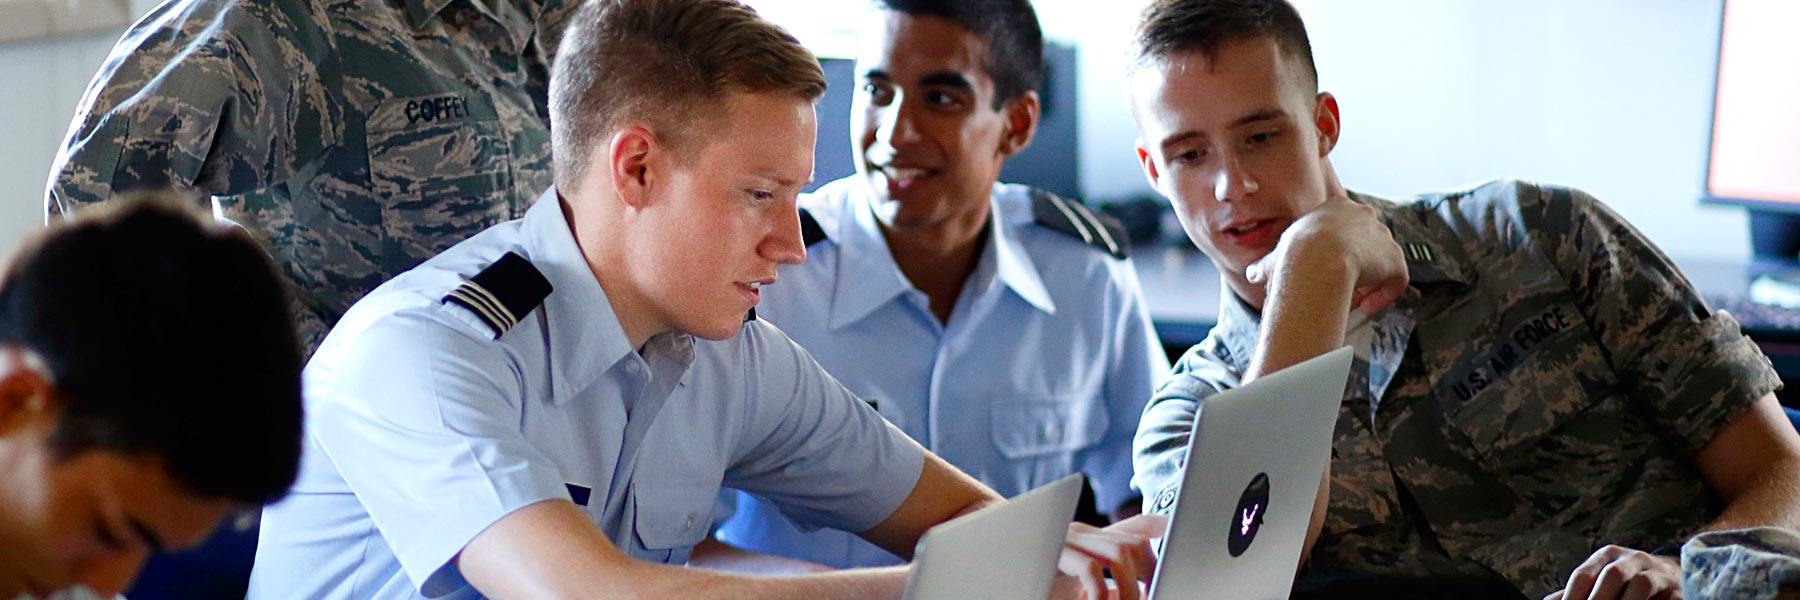 Cadets gather around a laptop during a study session.